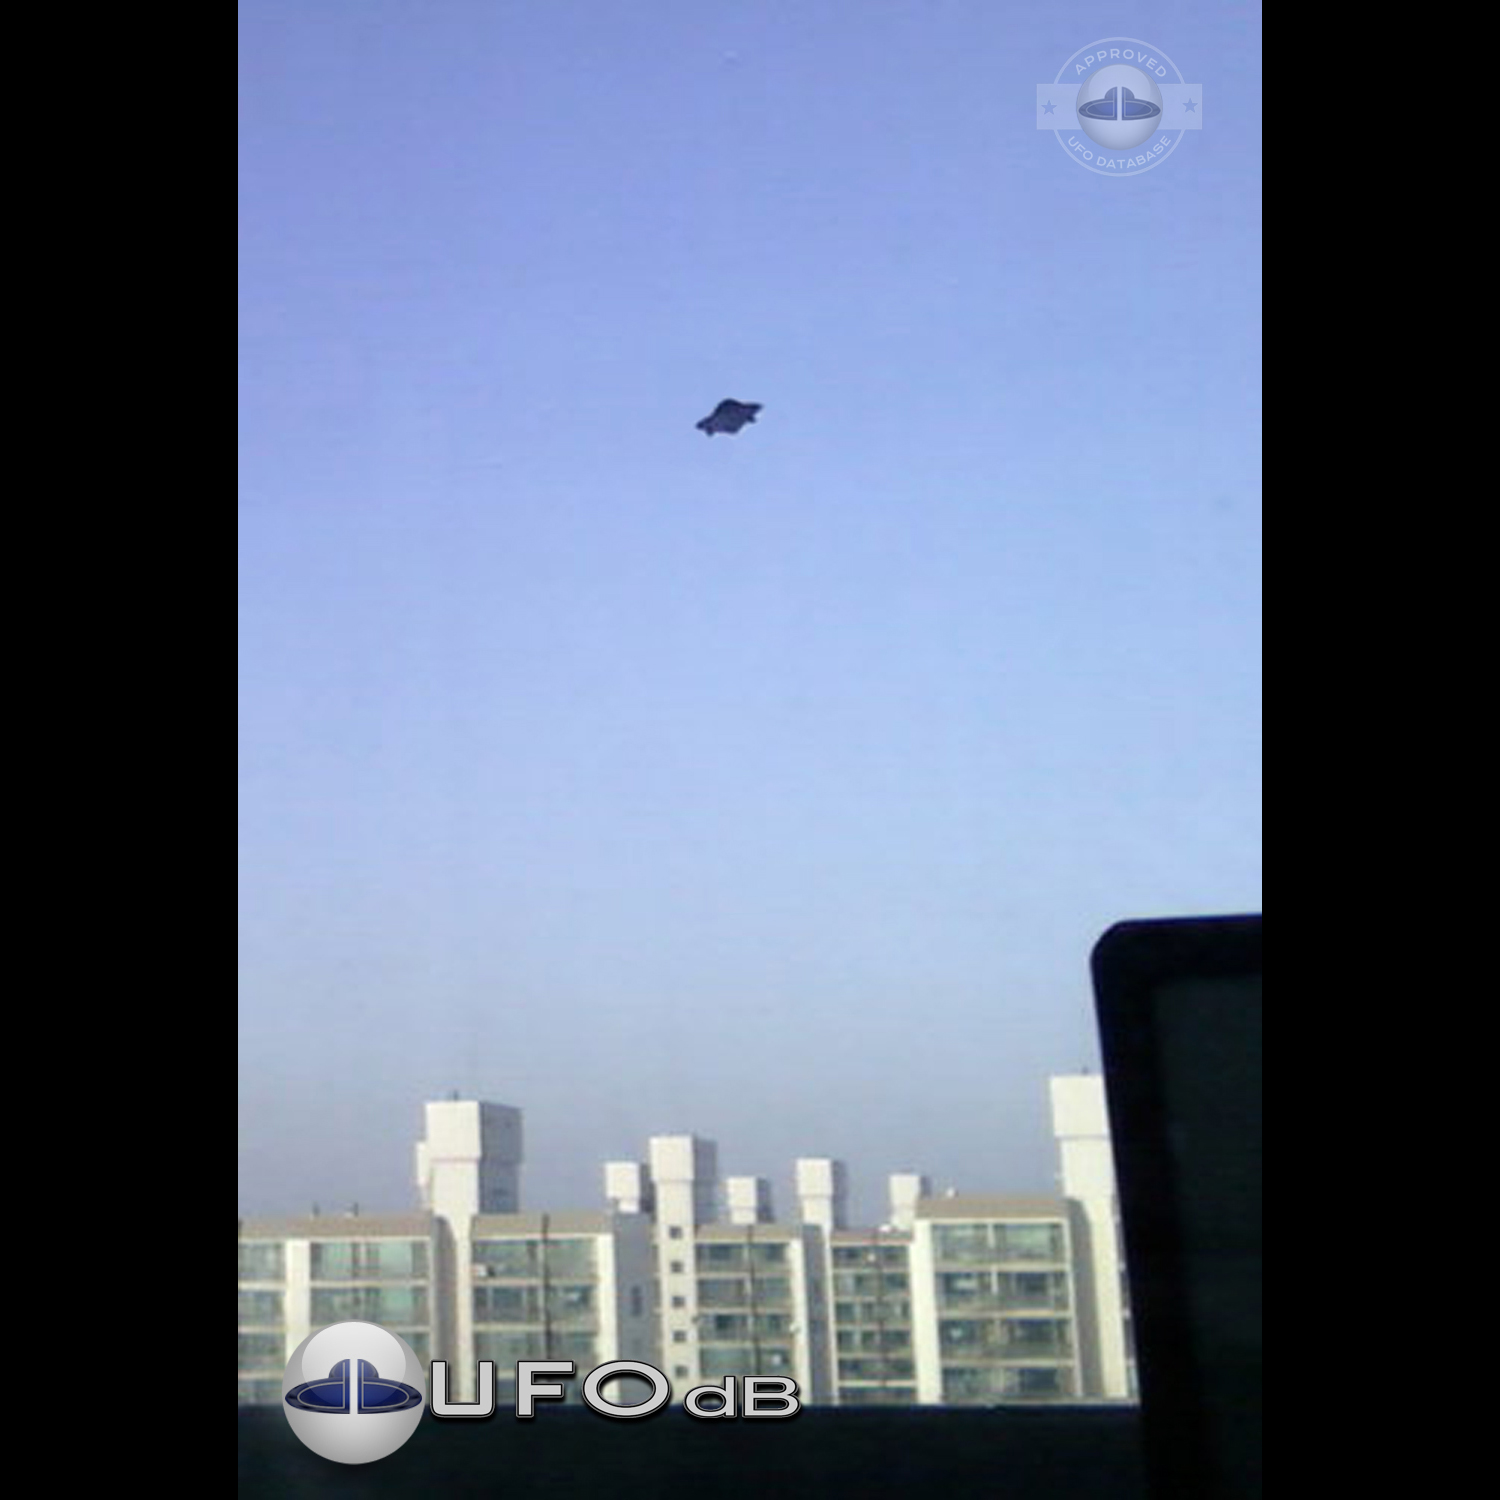 Teen student photograph incredible UFO picture | Koyang, South Korea UFO Picture #197-1